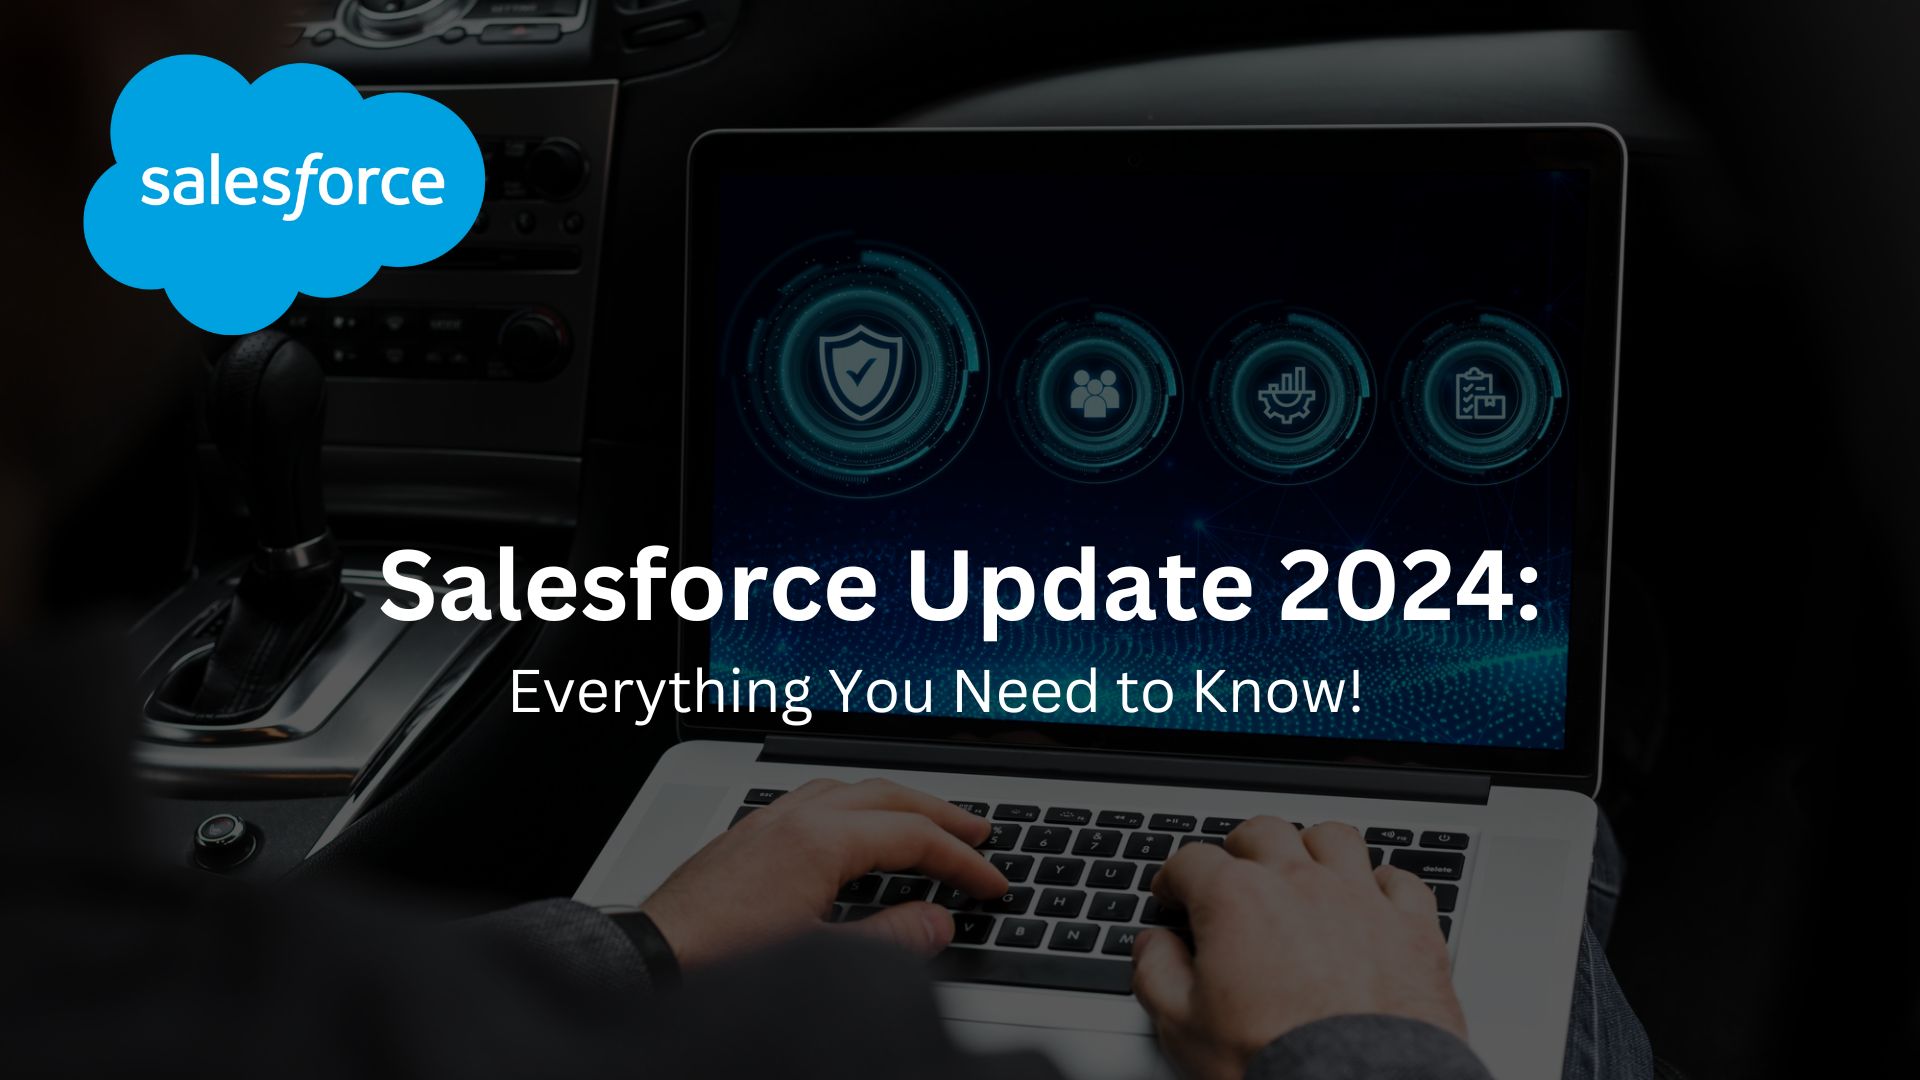 Latest Salesforce Updates: Everything You Need to Know About Salesforce Update 2024